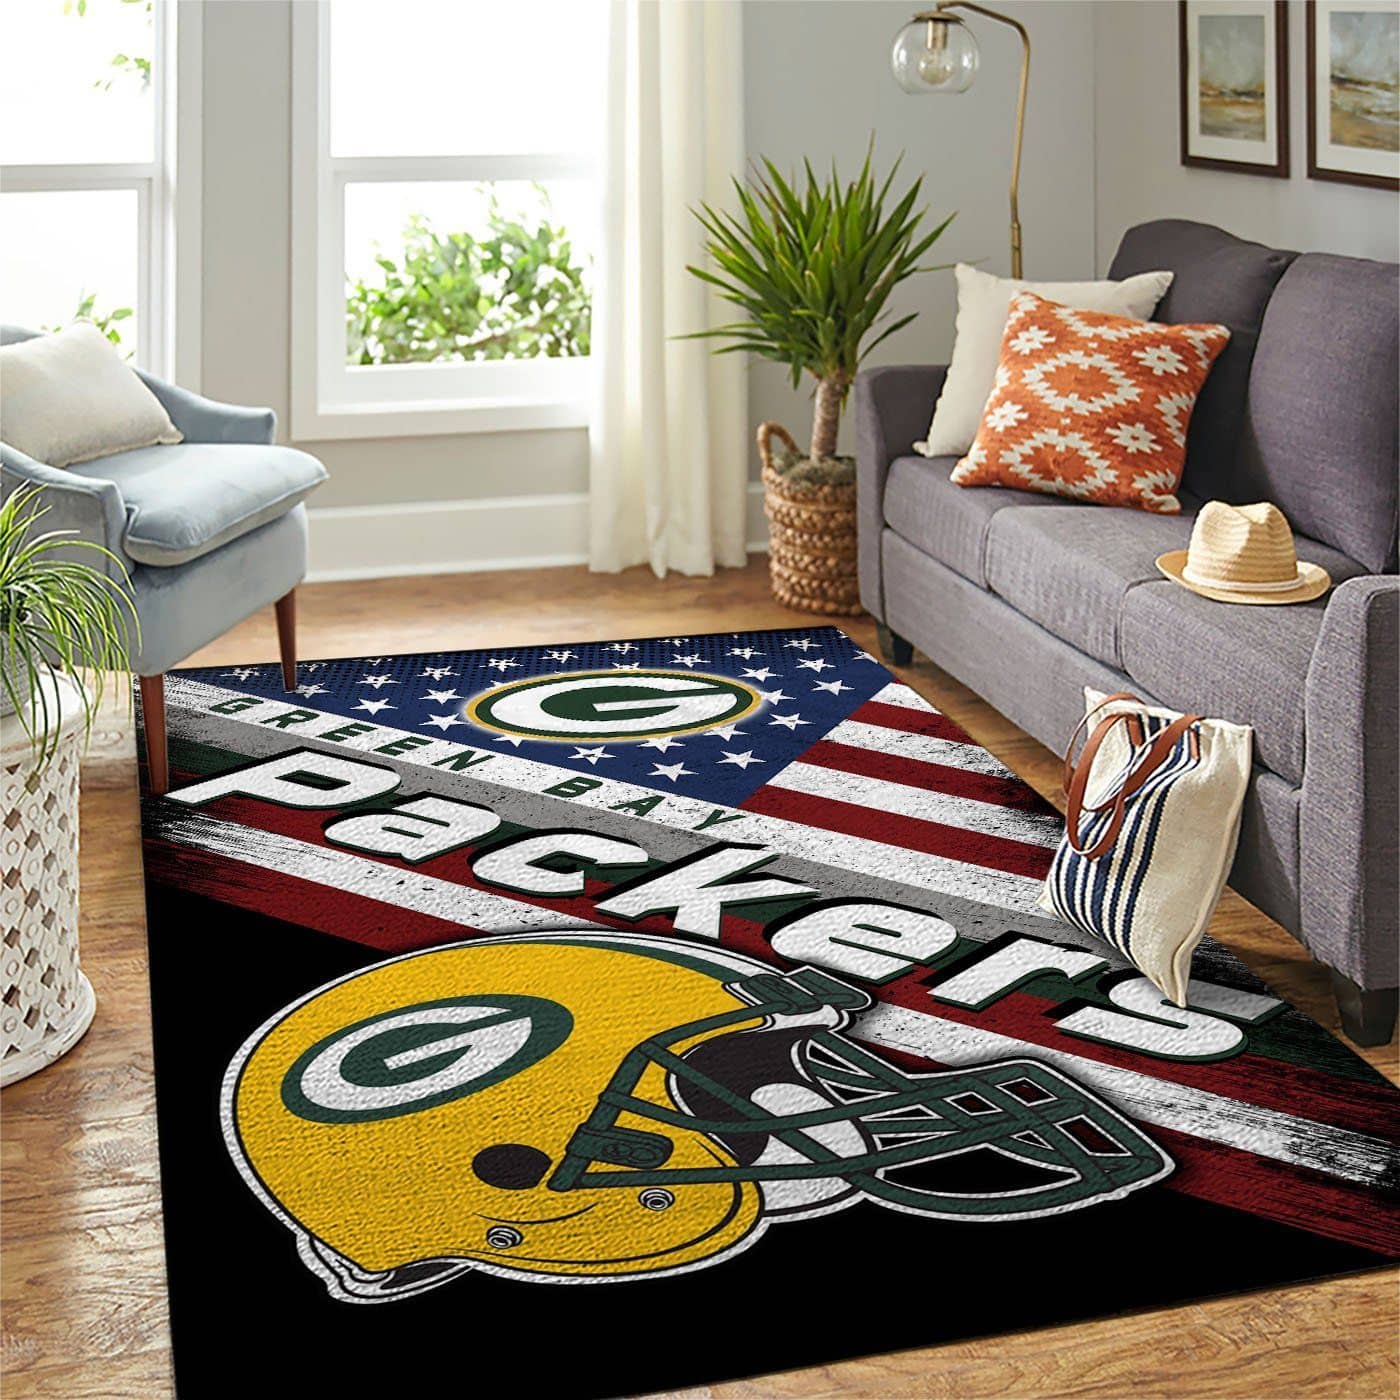 Amazon Green Bay Packers Living Room Area No3109 Rug